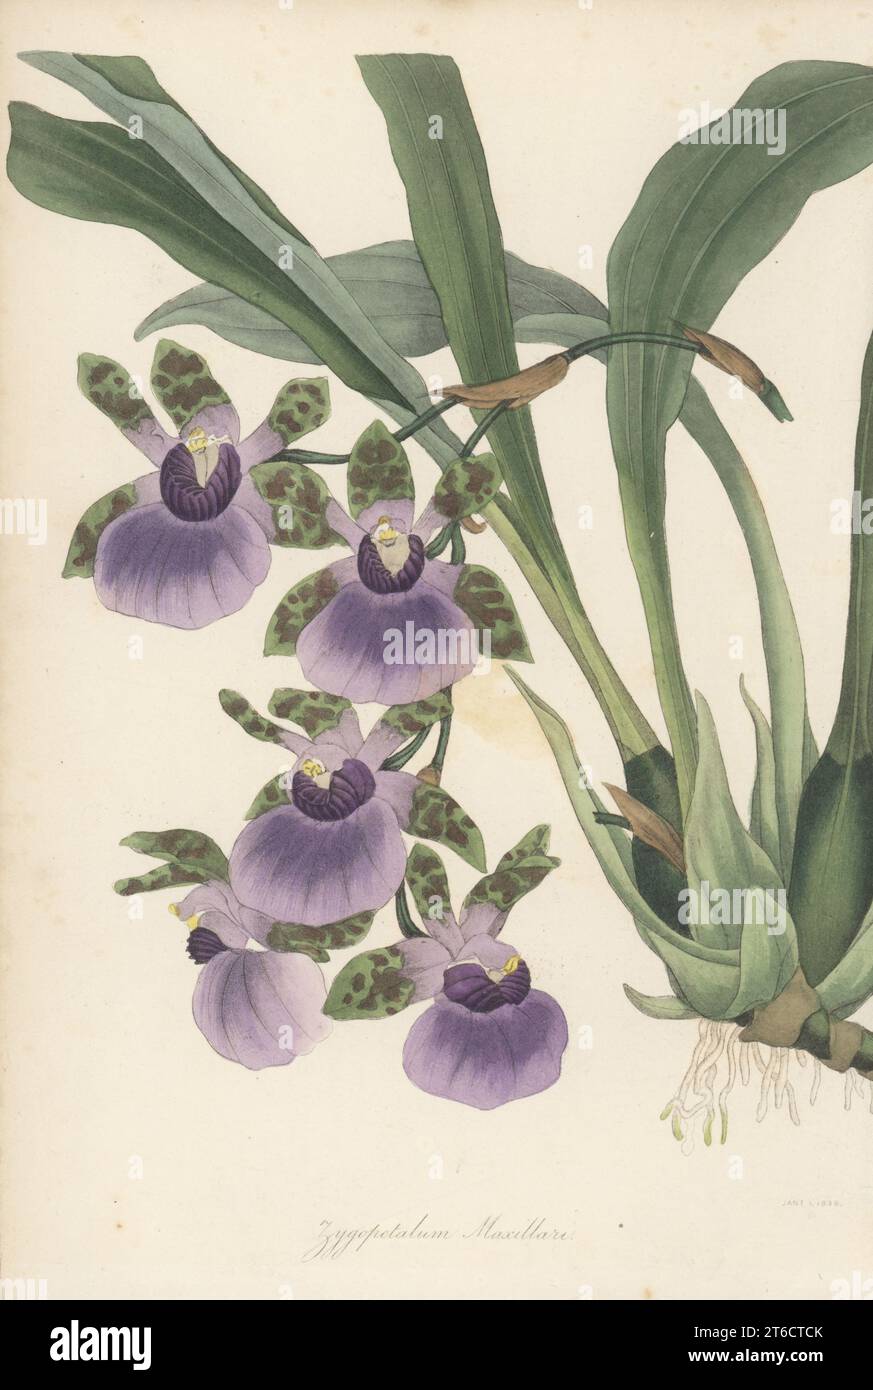 Tooth-like flowered zygopetalum orchid, Zygopetalum maxillare. Native to Brazil, Paraguay and Argentina, sent by F. Warre from Rio de Janeiro to nurseryman George Loddiges in Hackney. Handcoloured engraving from Joseph Paxtons Magazine of Botany, and Register of Flowering Plants, Volume 4, Orr and Smith, London, 1837. Stock Photo